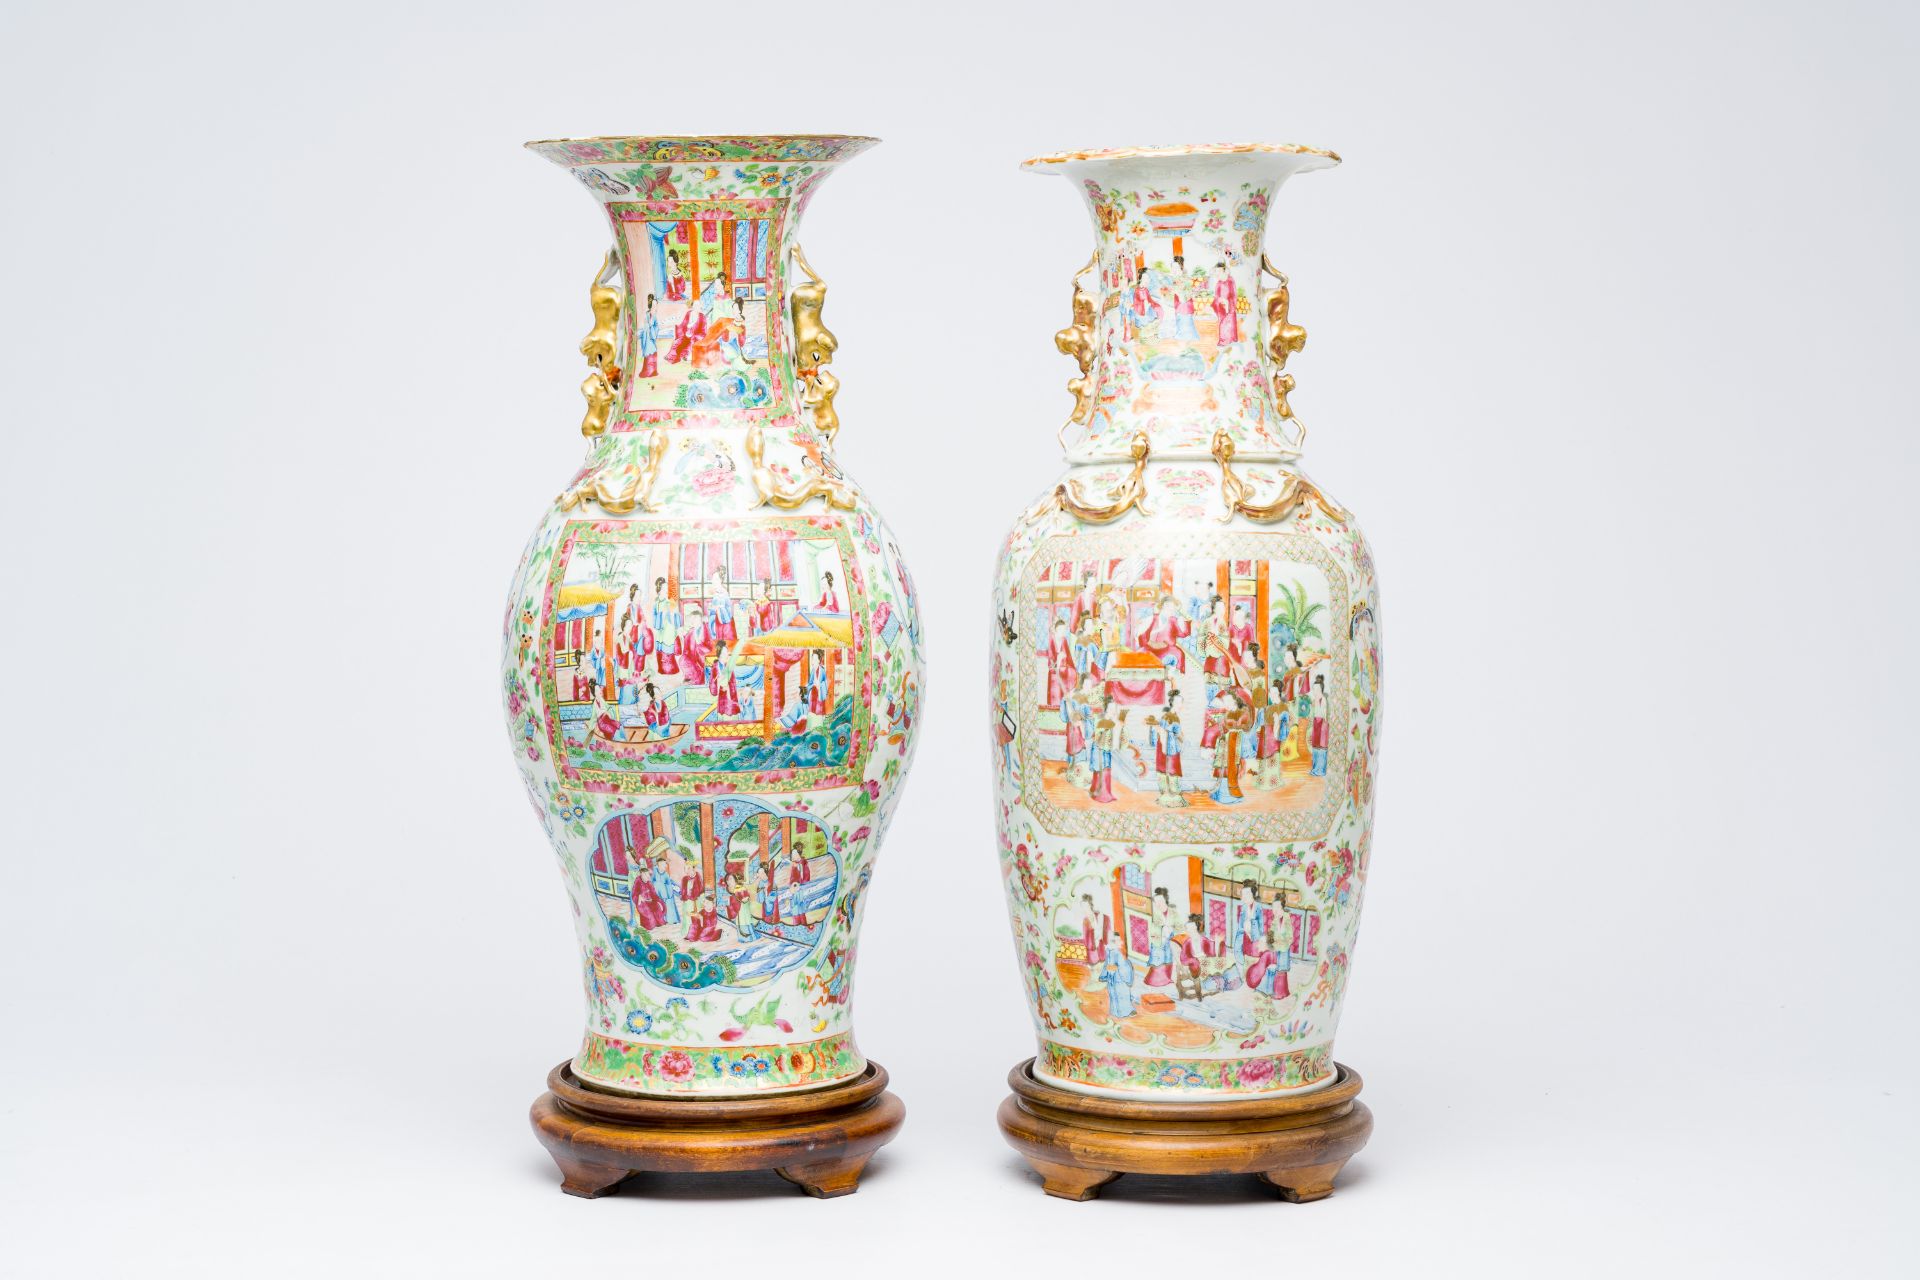 Two Chinese Canton famille rose vases with palace scenes and floral design, 19th C.